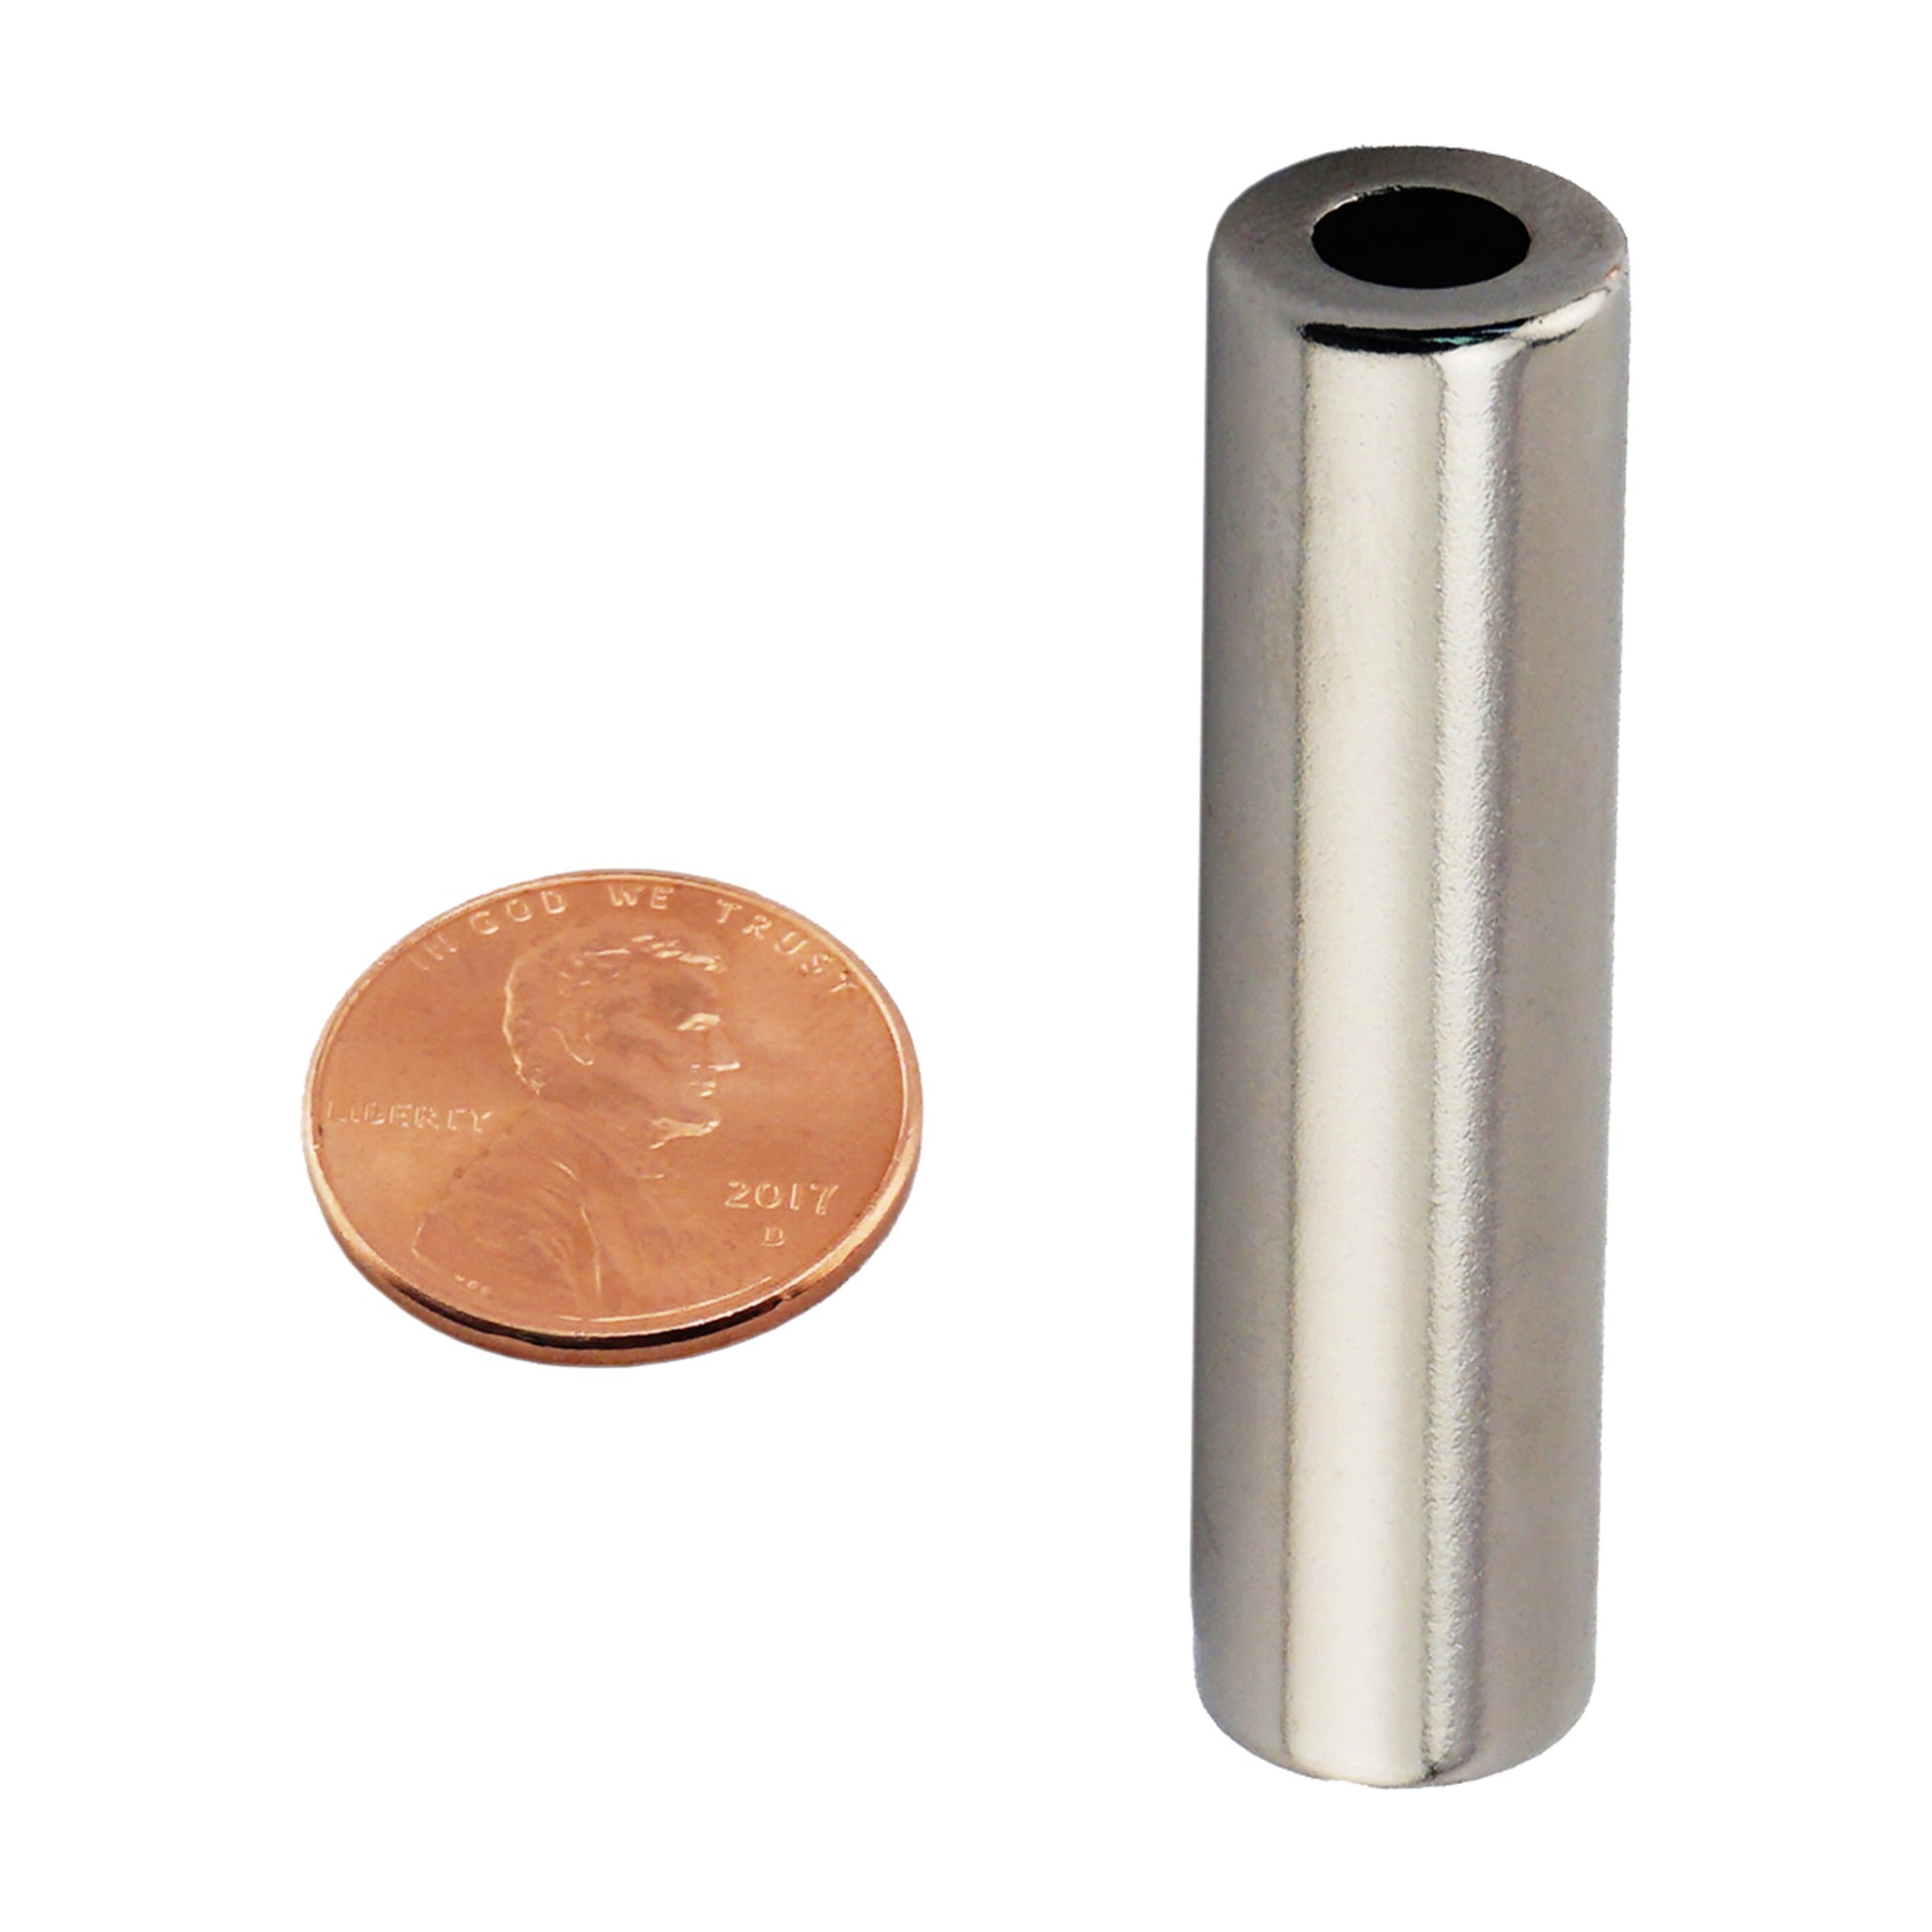 Load image into Gallery viewer, NR005023N Neodymium Ring Magnet - Compared to Penny for Size Reference